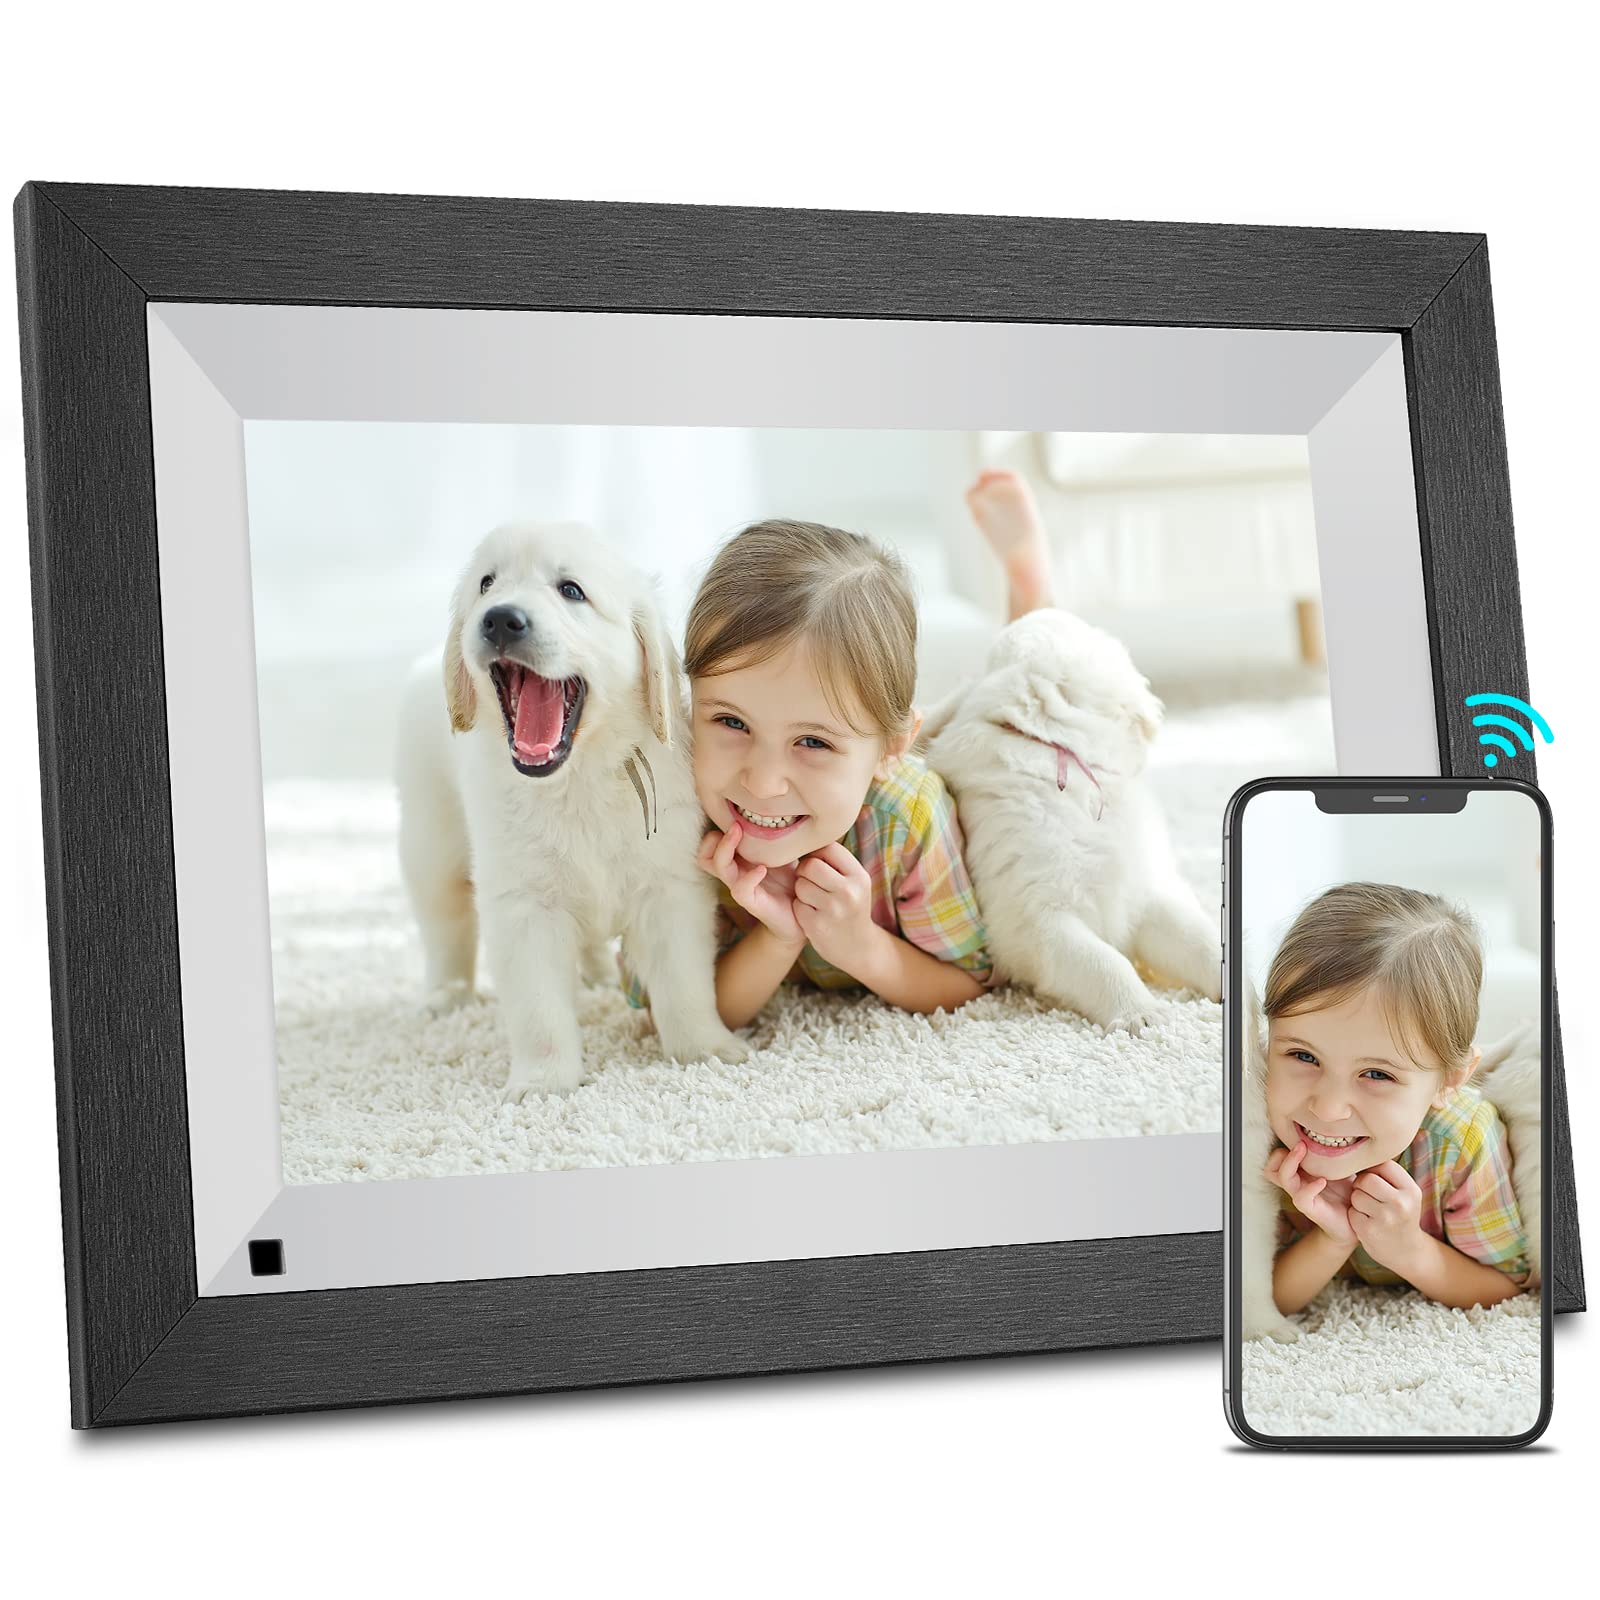 BSIMB WiFi Digital Picture Frame with Wood Effect, 16GB Electronic Photo Frame 10.1 Inch HD IPS Touch Screen Display, Instantly Share Photos/Videos via App Email, Auto-Rotate, Gift for Grandparents